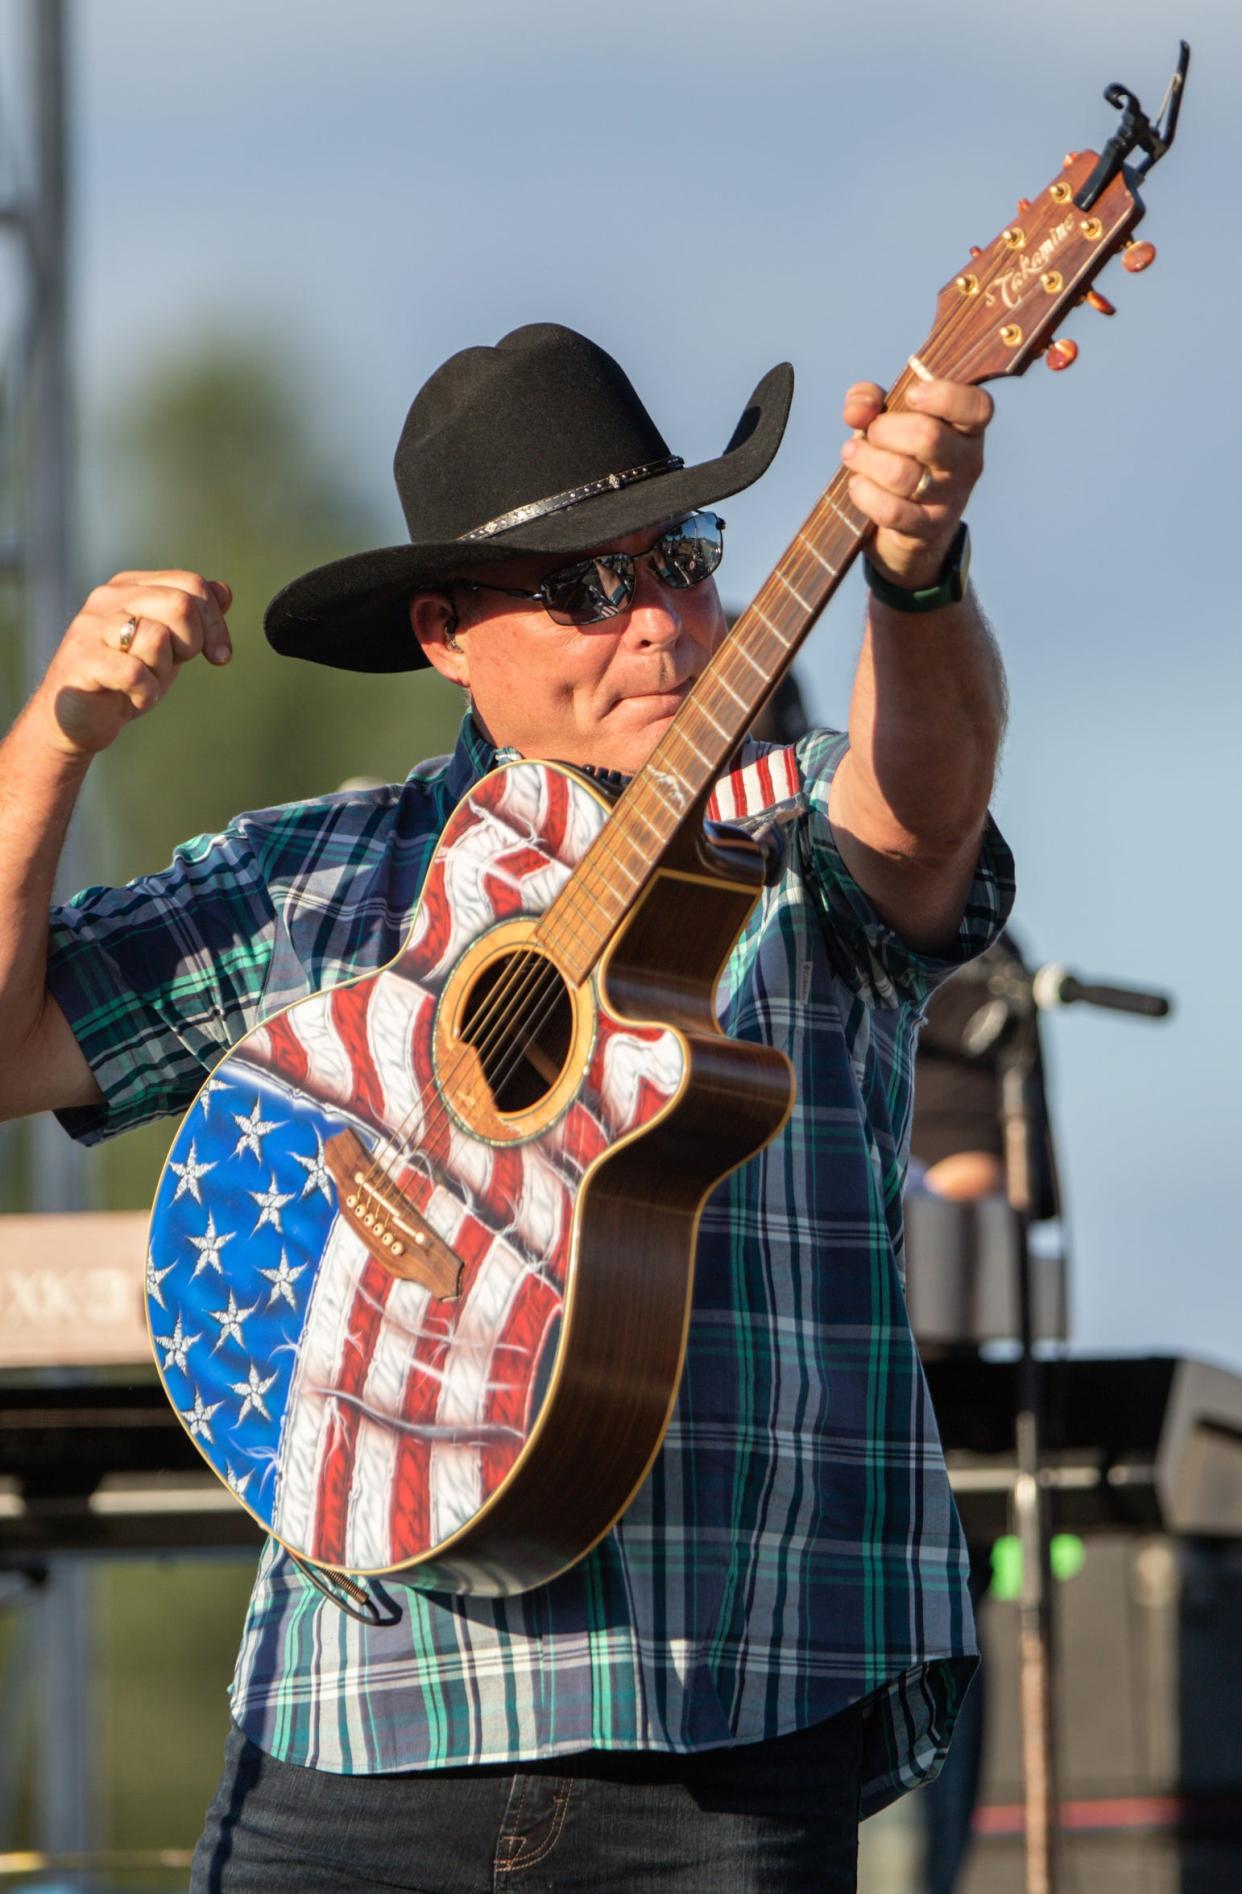 John Michael Montgomery gets his concert off to an energetic start at the Fowlerville Family Fair in Fowlerville, Michigan, July 30, 2022.